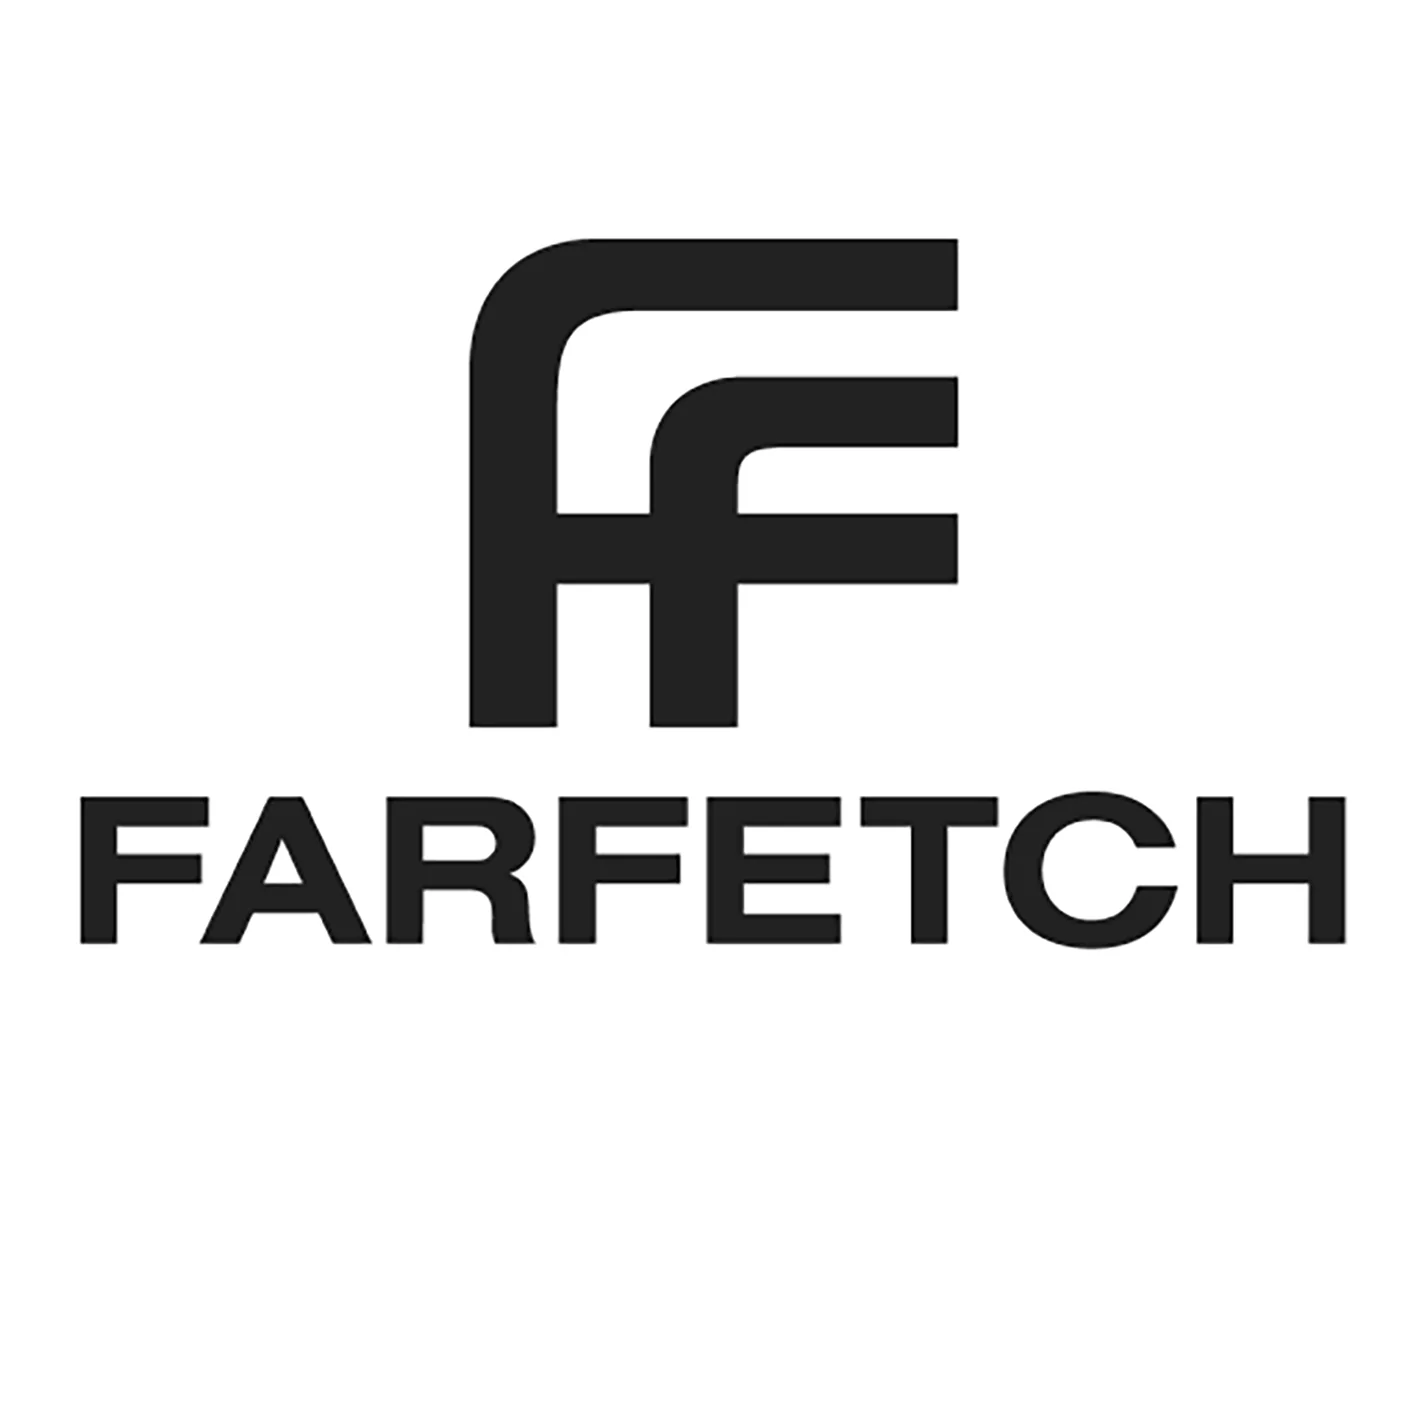 Go to Farfetch offers page